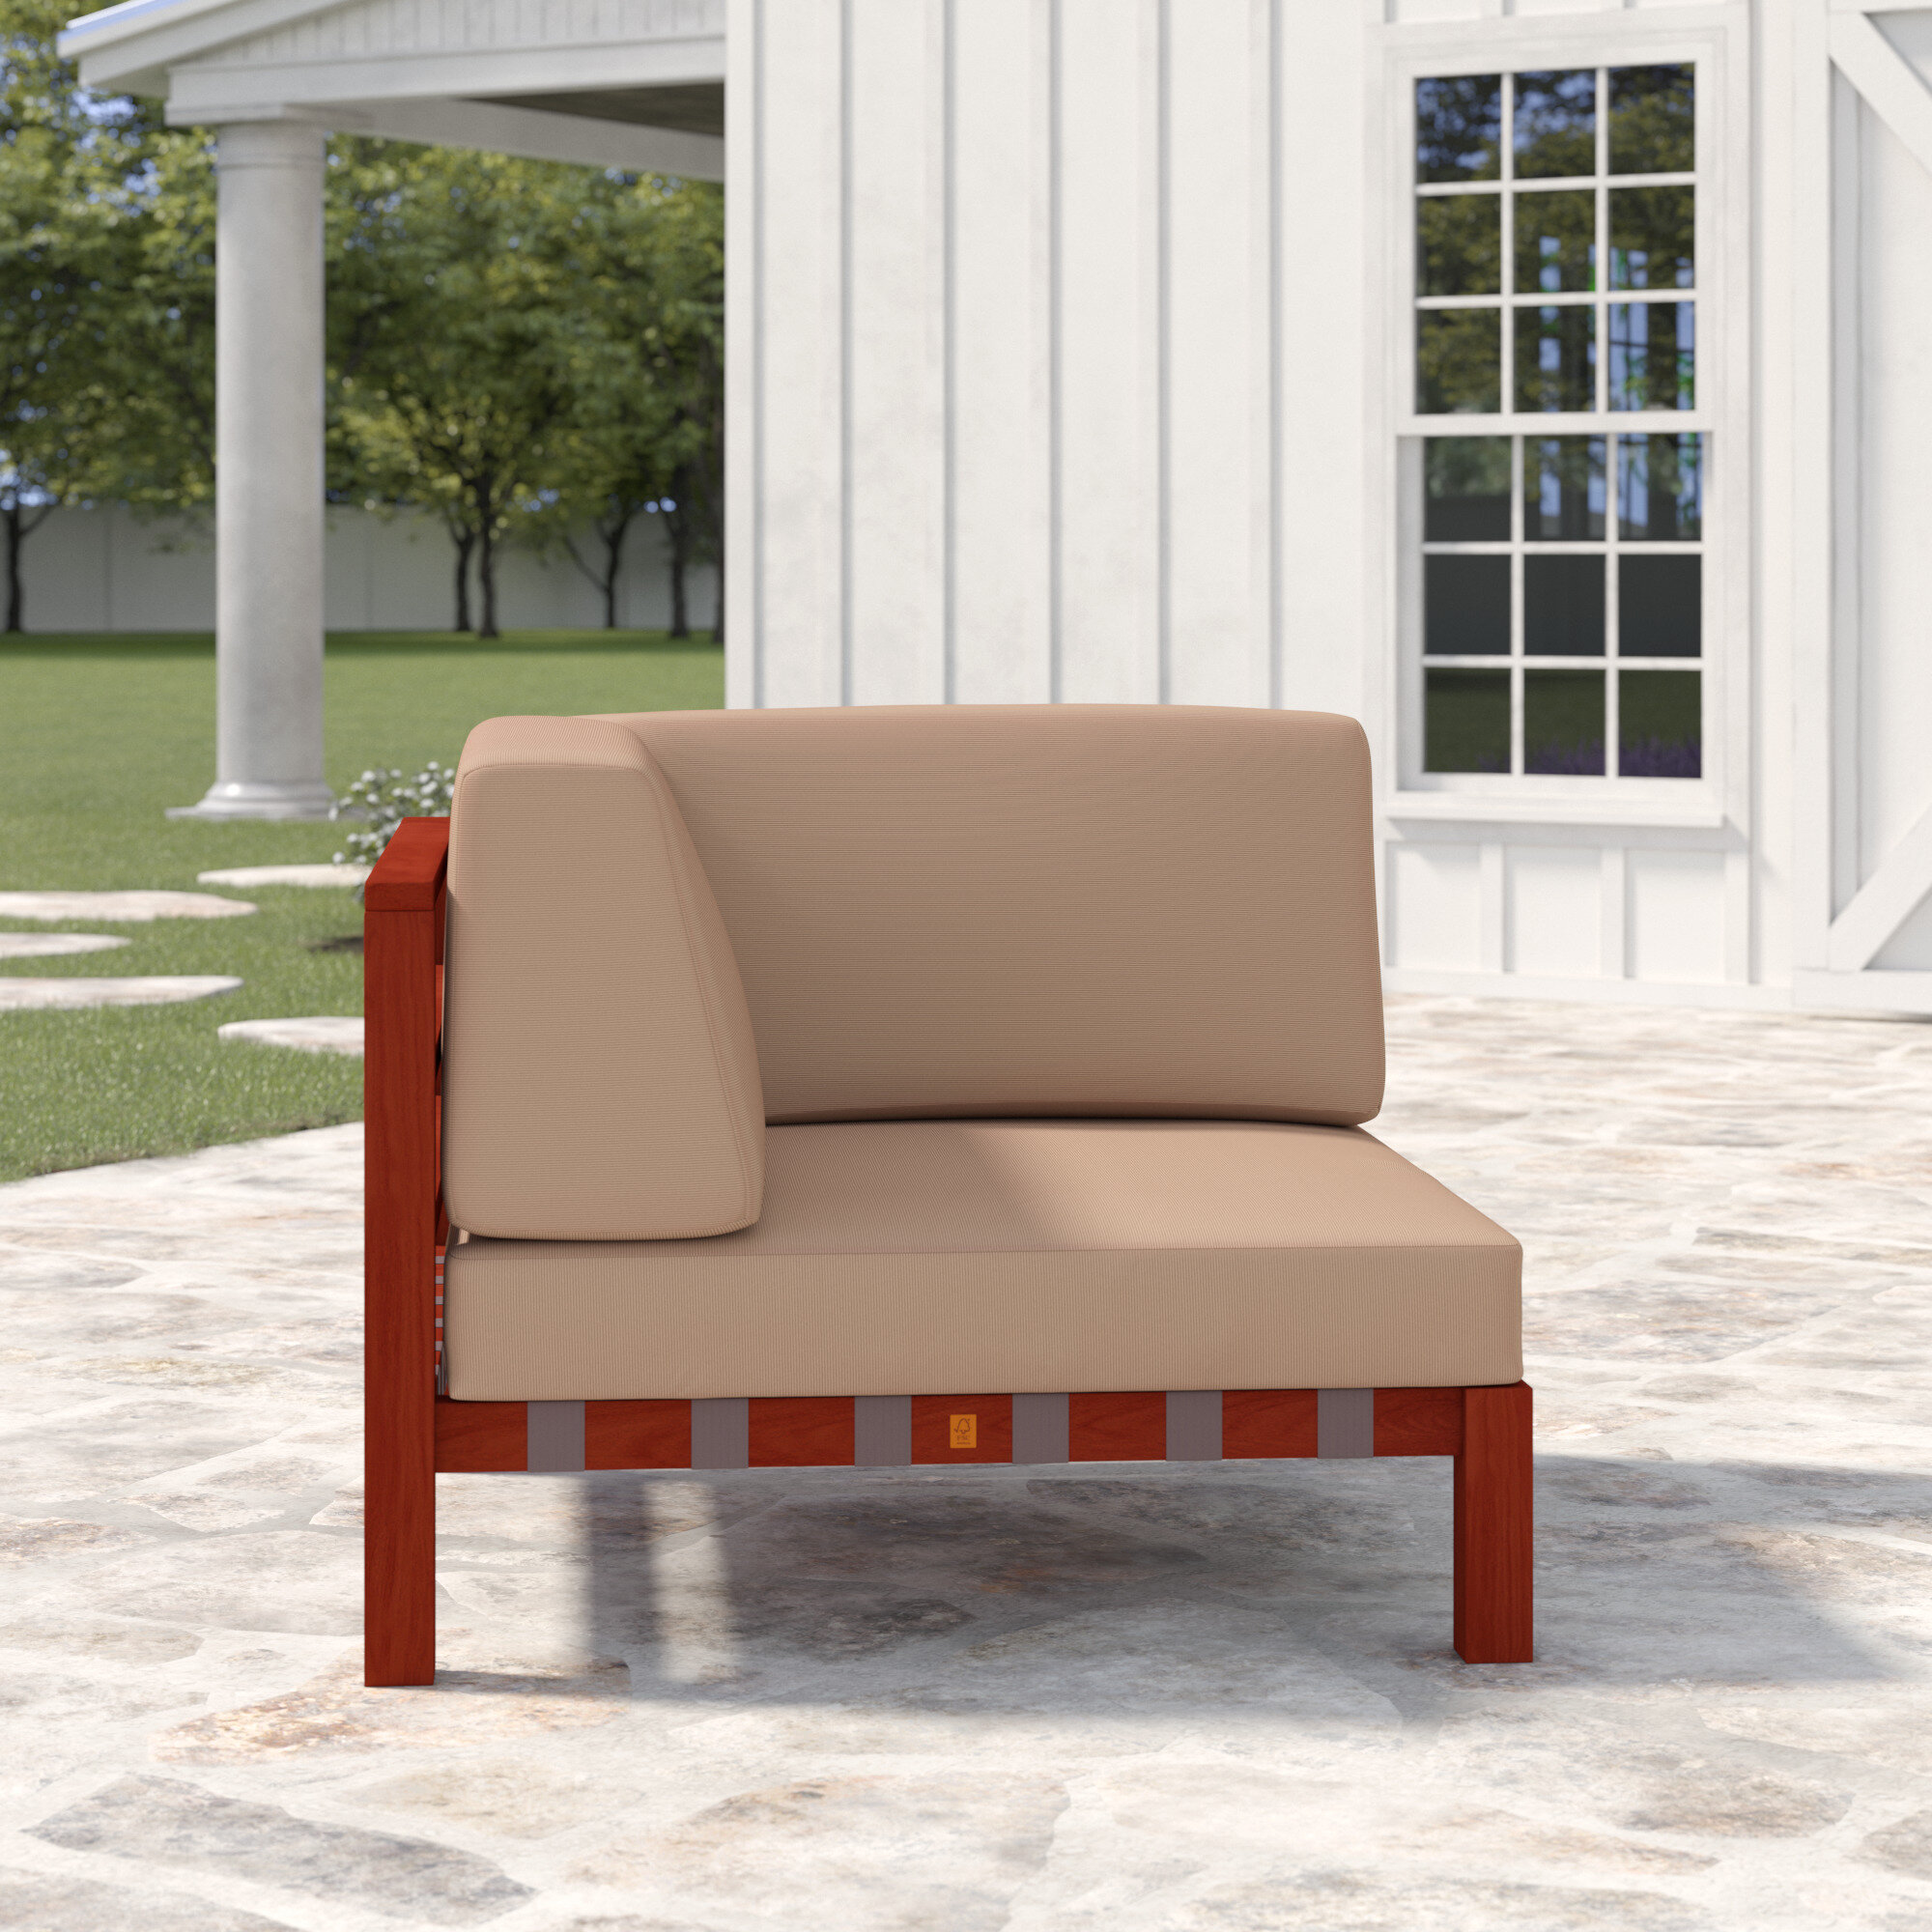 Antonia Modern Outdoor Wood Patio Chair With Cushions  . We Recommend Cedar Wood For Building This Sofa.